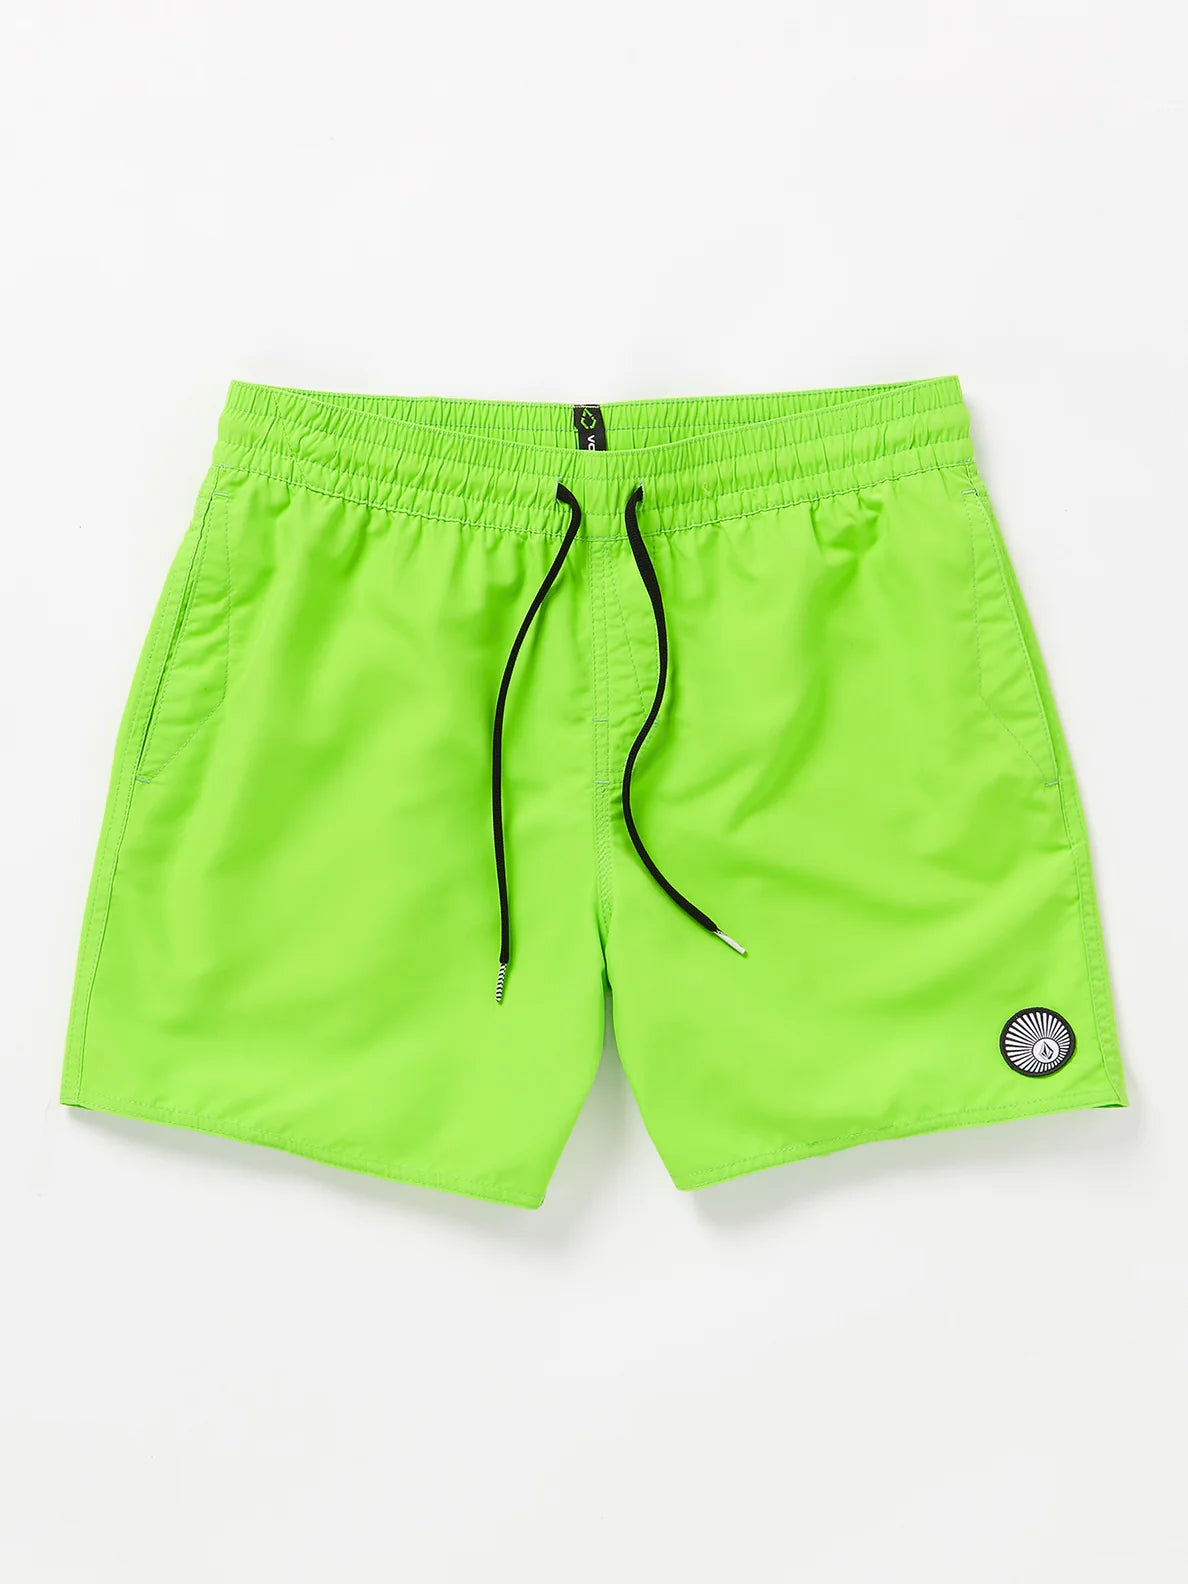 Volcom Lido Solid 16" Trunks - Electric Green